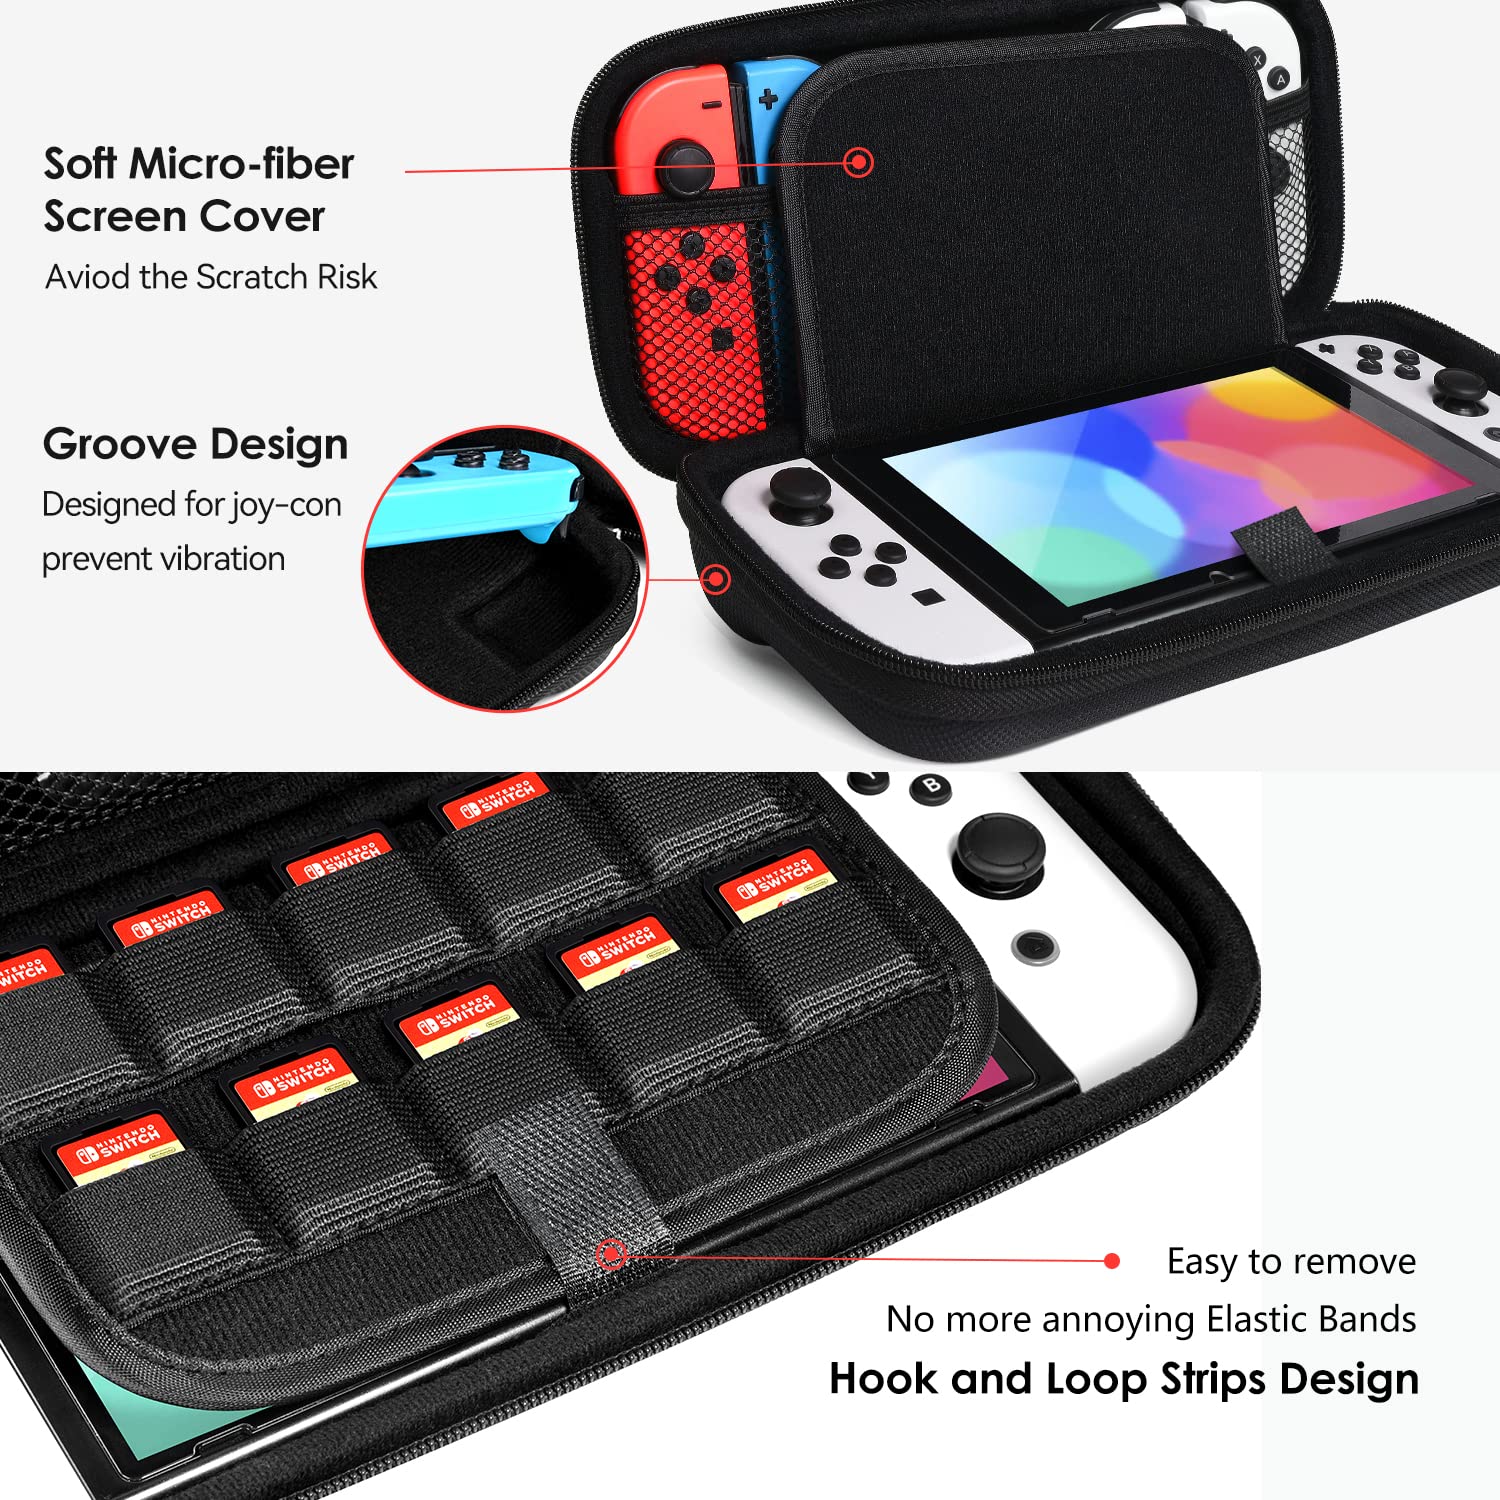 ivoler Carrying Case for Nintendo Switch and NEW Switch OLED Model(2021), Portable Hard Shell Pouch Carrying Travel Game Bag for Switch Accessories Holds 10 Game Cartridge